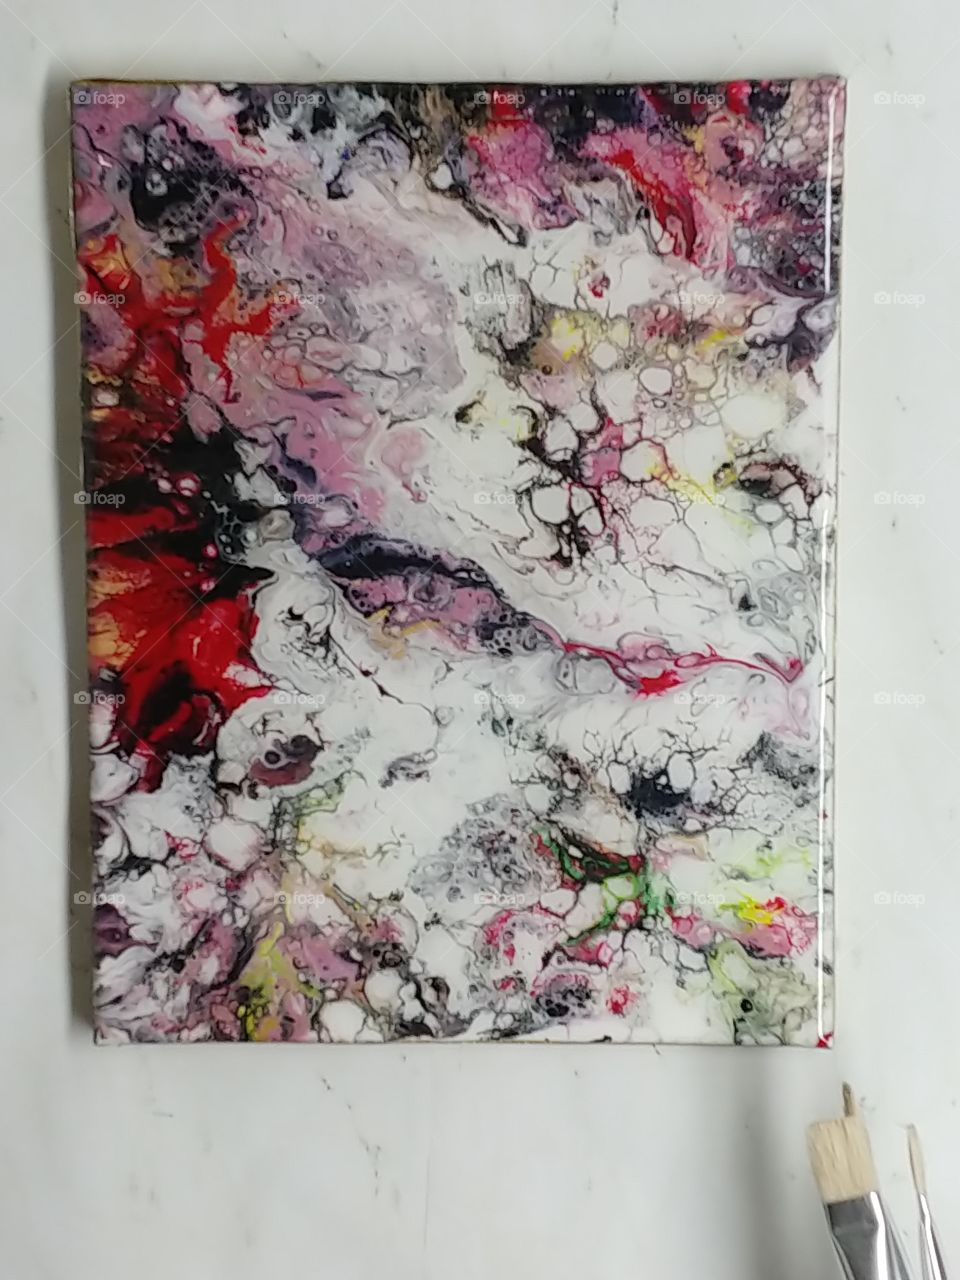 wall art with abstract desgins from an acrylic pour. multicolored!